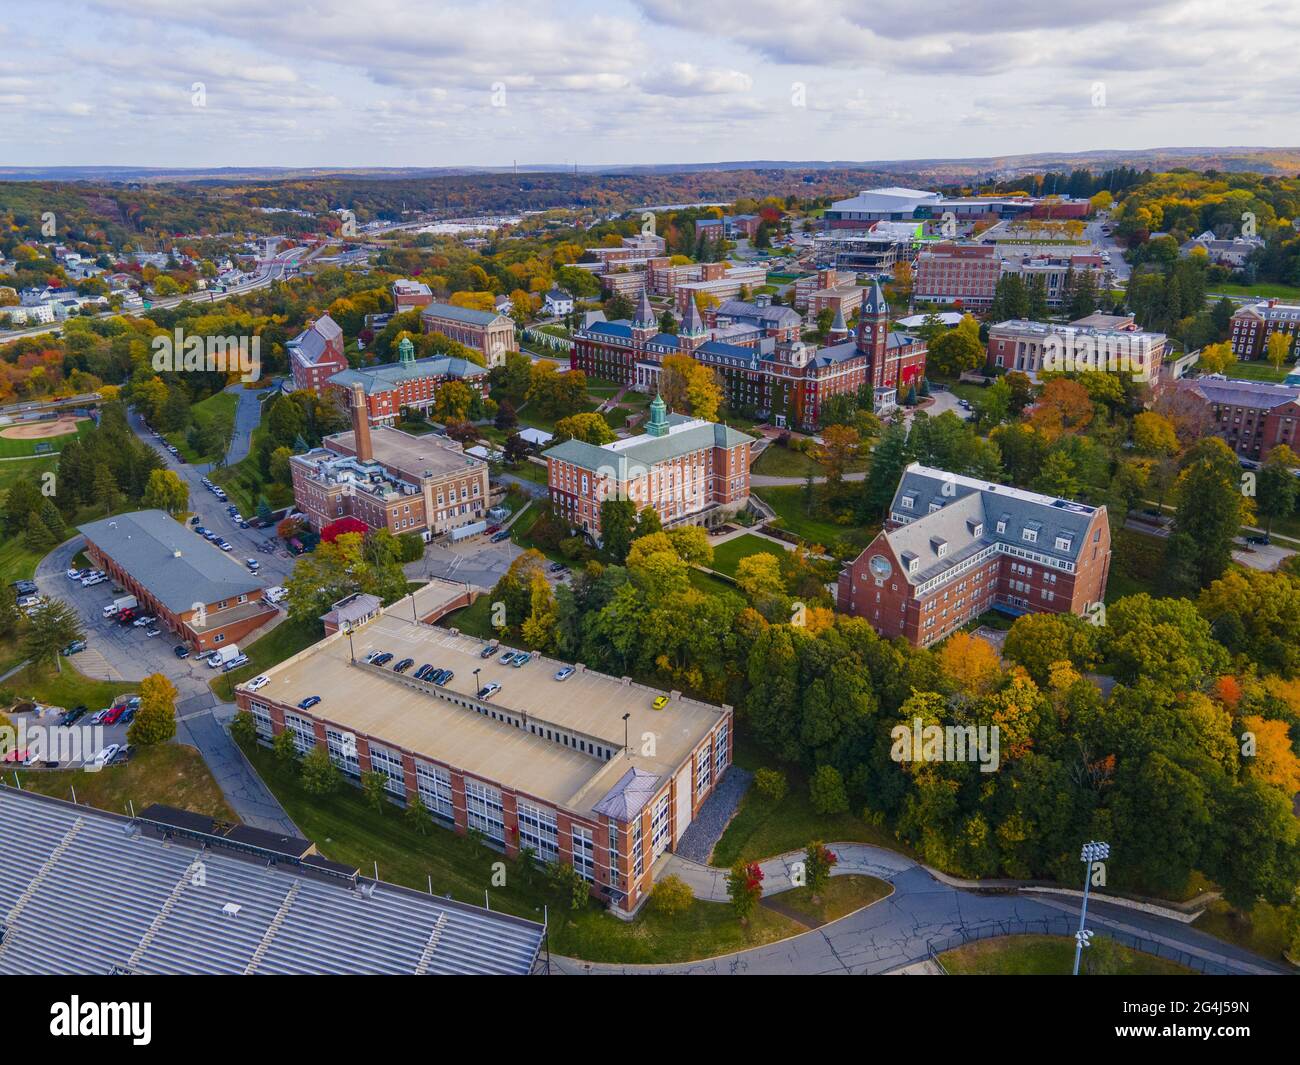 College of the Holy Cross and landscape aerial view with fall foliage, City of Worcester, Massachusetts MA, USA. Stock Photo